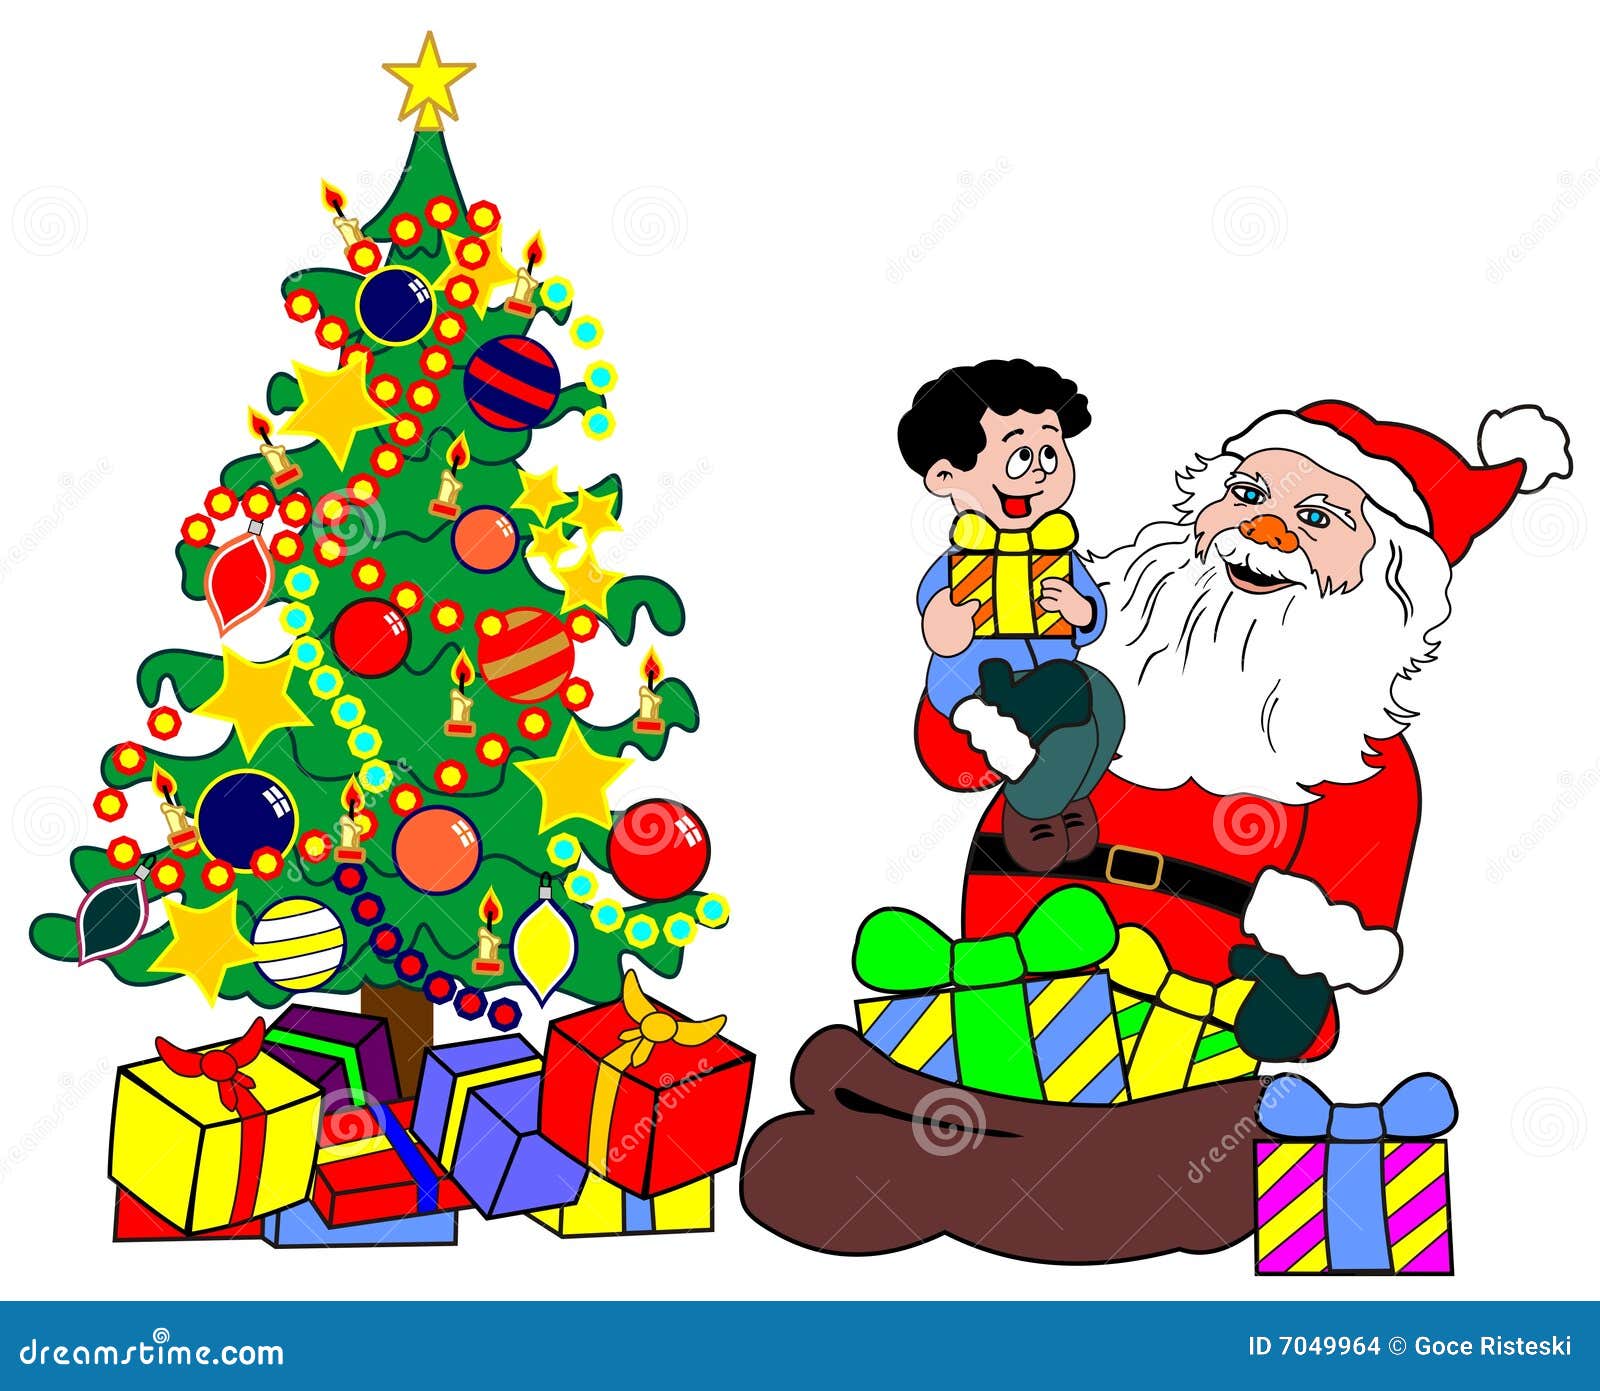 Santa with child and christmas tree Download preview Add to lightbox FREE DOWNLOAD